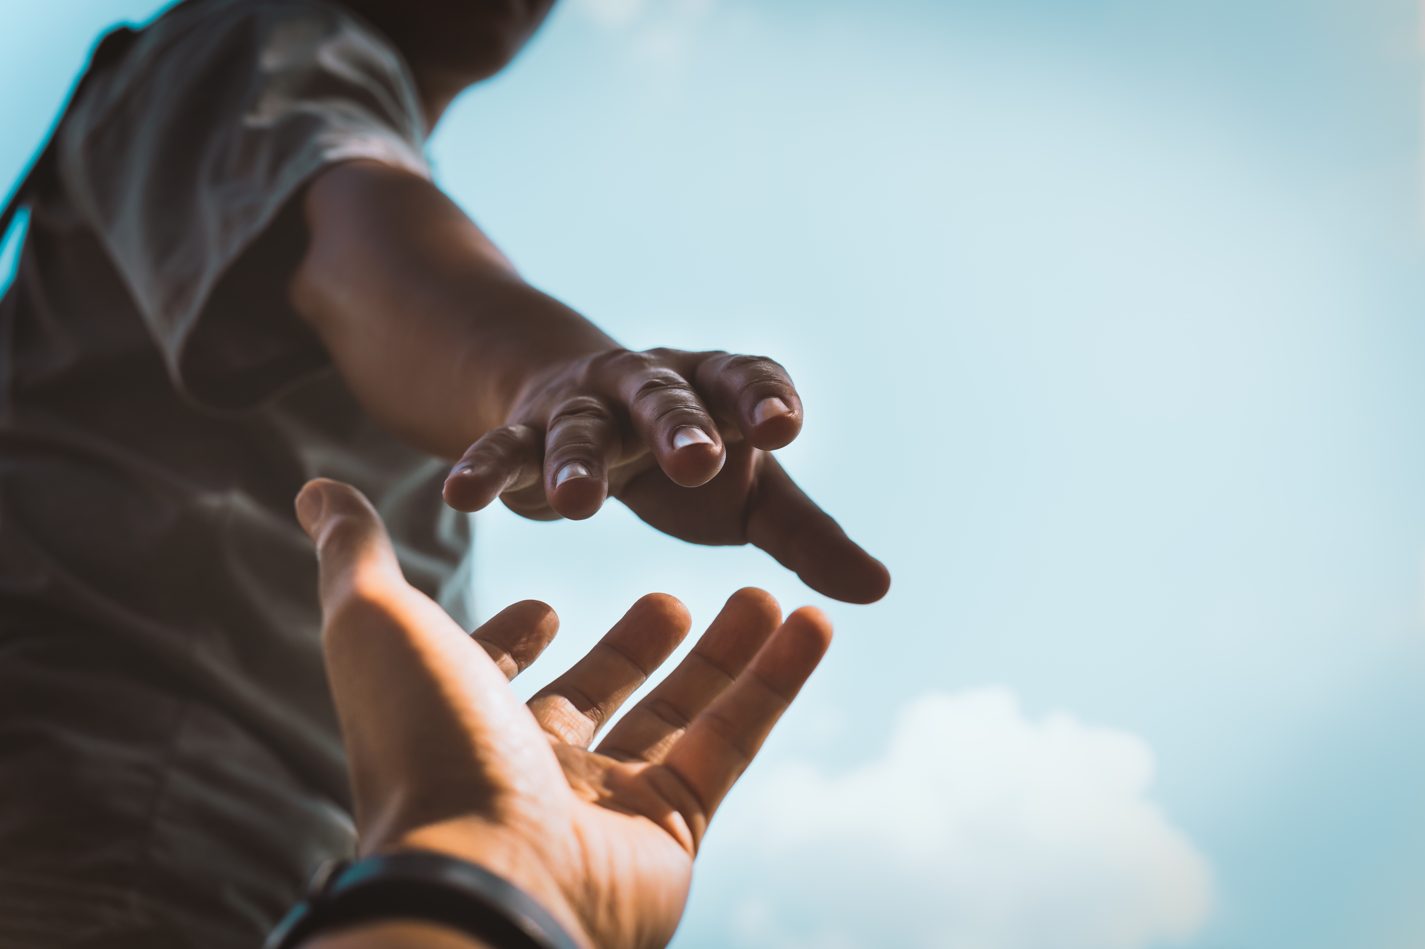 2 hands of young people reaching to each other on a cloudy background